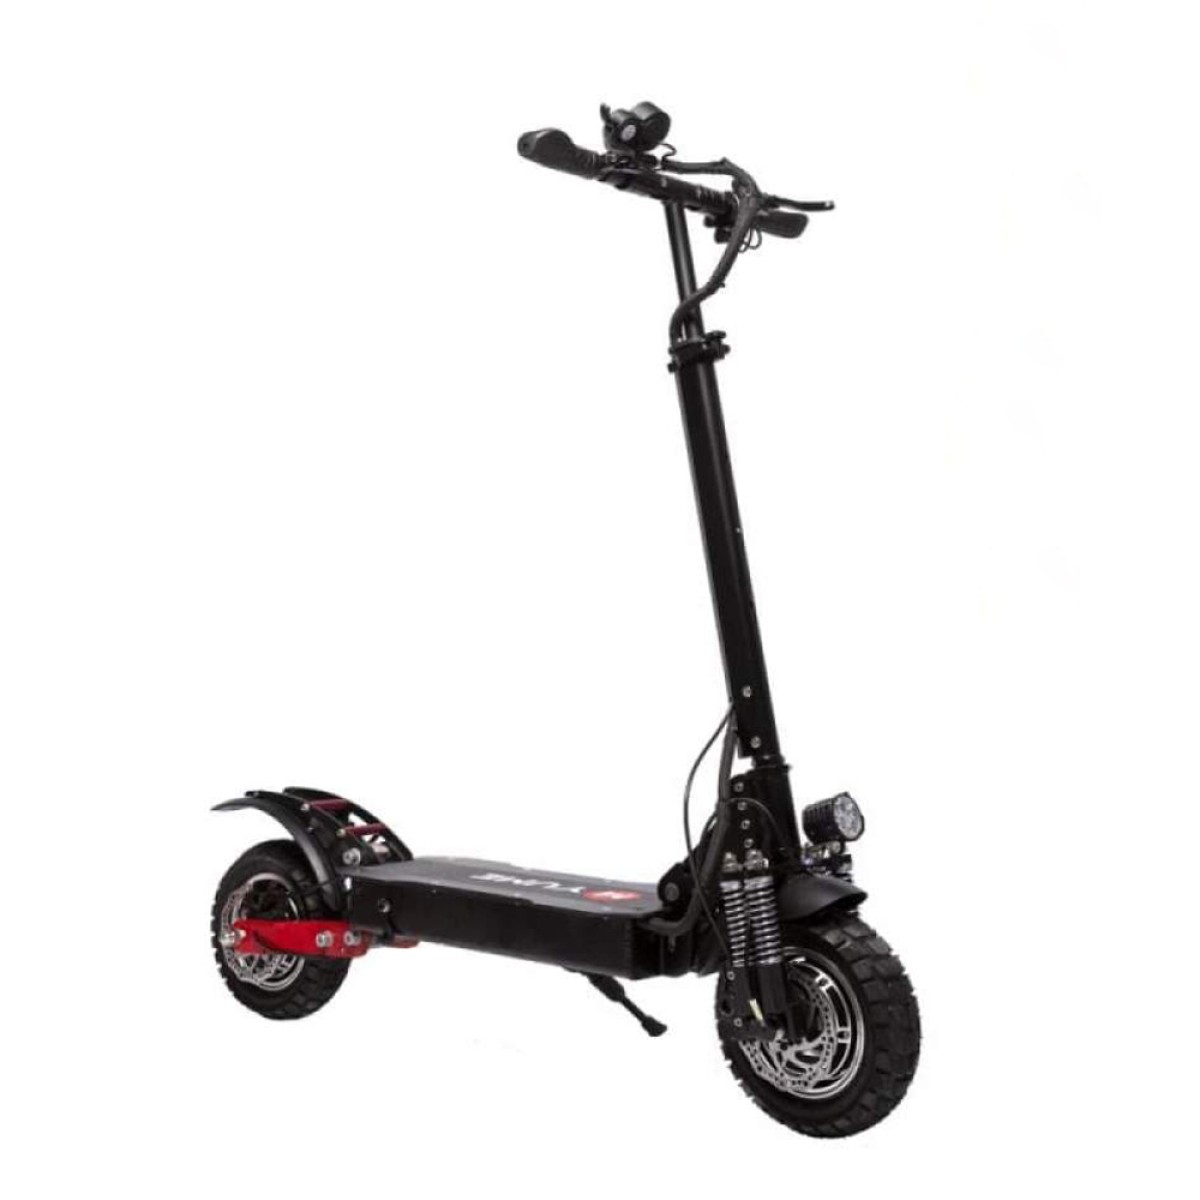 Yume D5 52V 2400W dual motor 23.4ah folding electric scooter 65-70 km/h top speed 80km range milage 10inch off road pneumatic